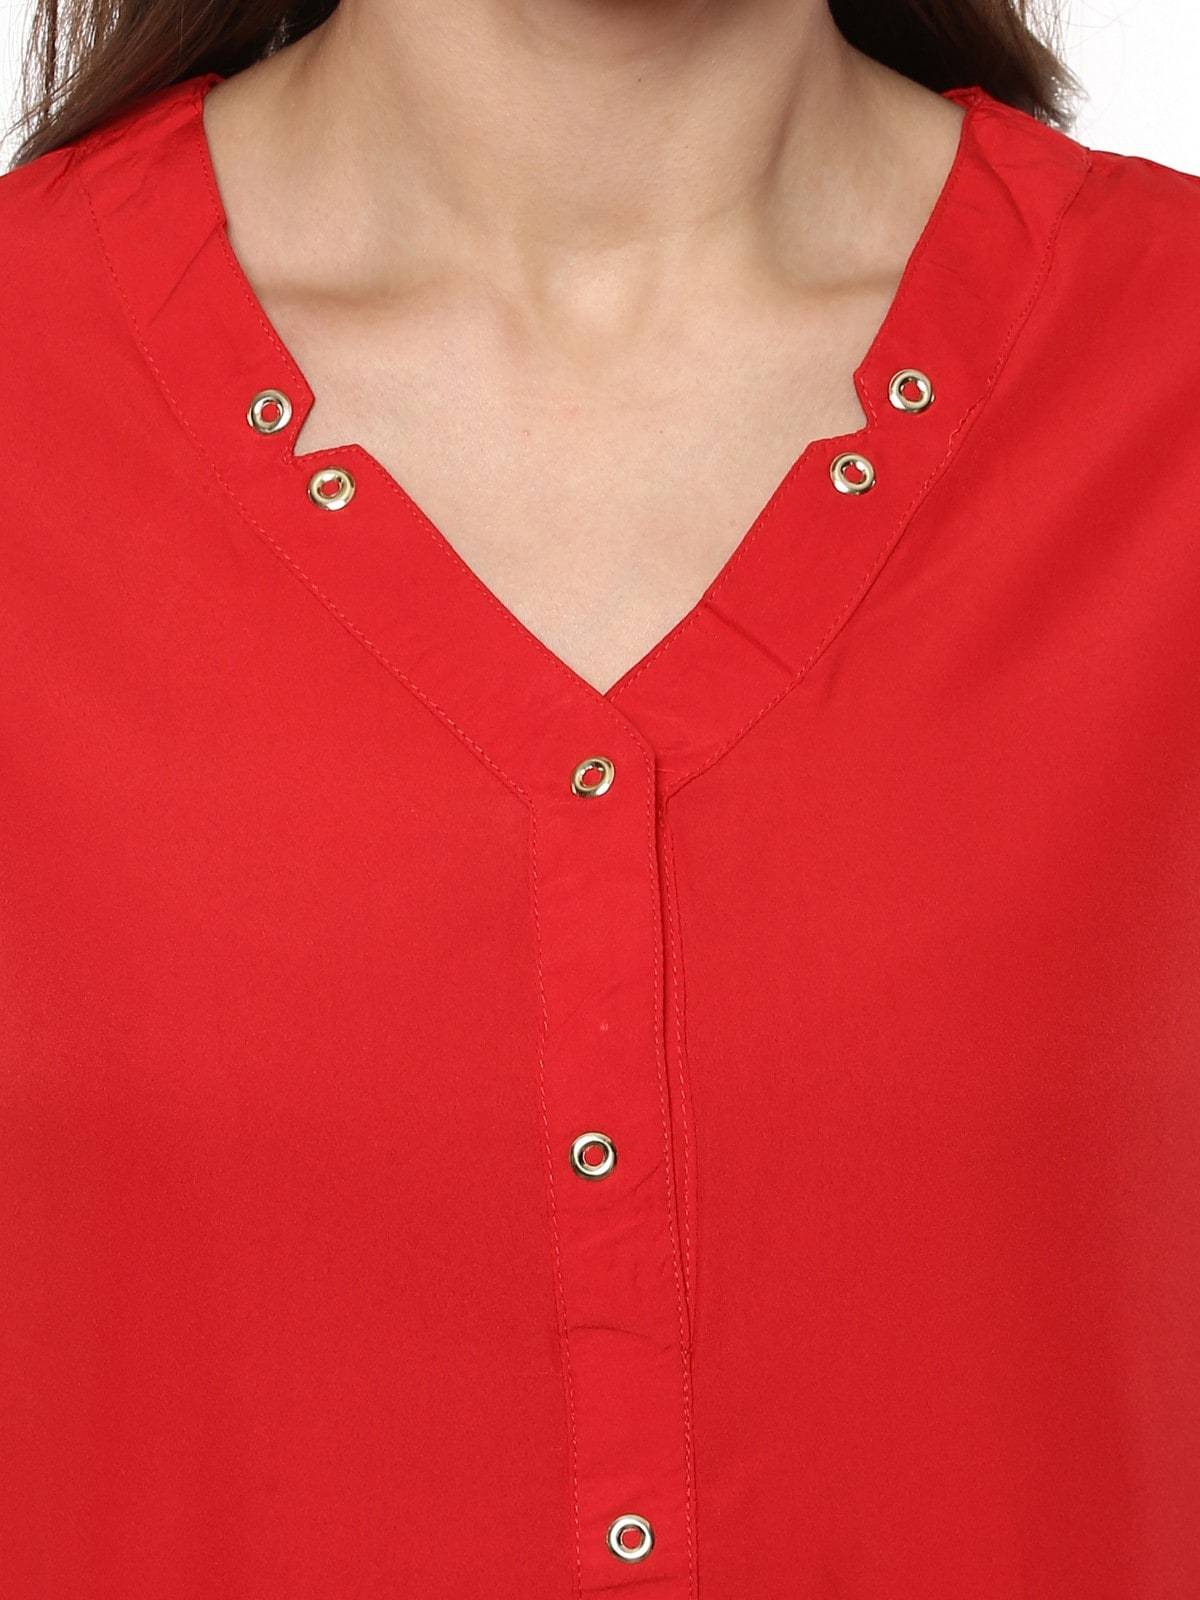 Women's Red Shirt Top With Detailed Notch Designs - Pannkh